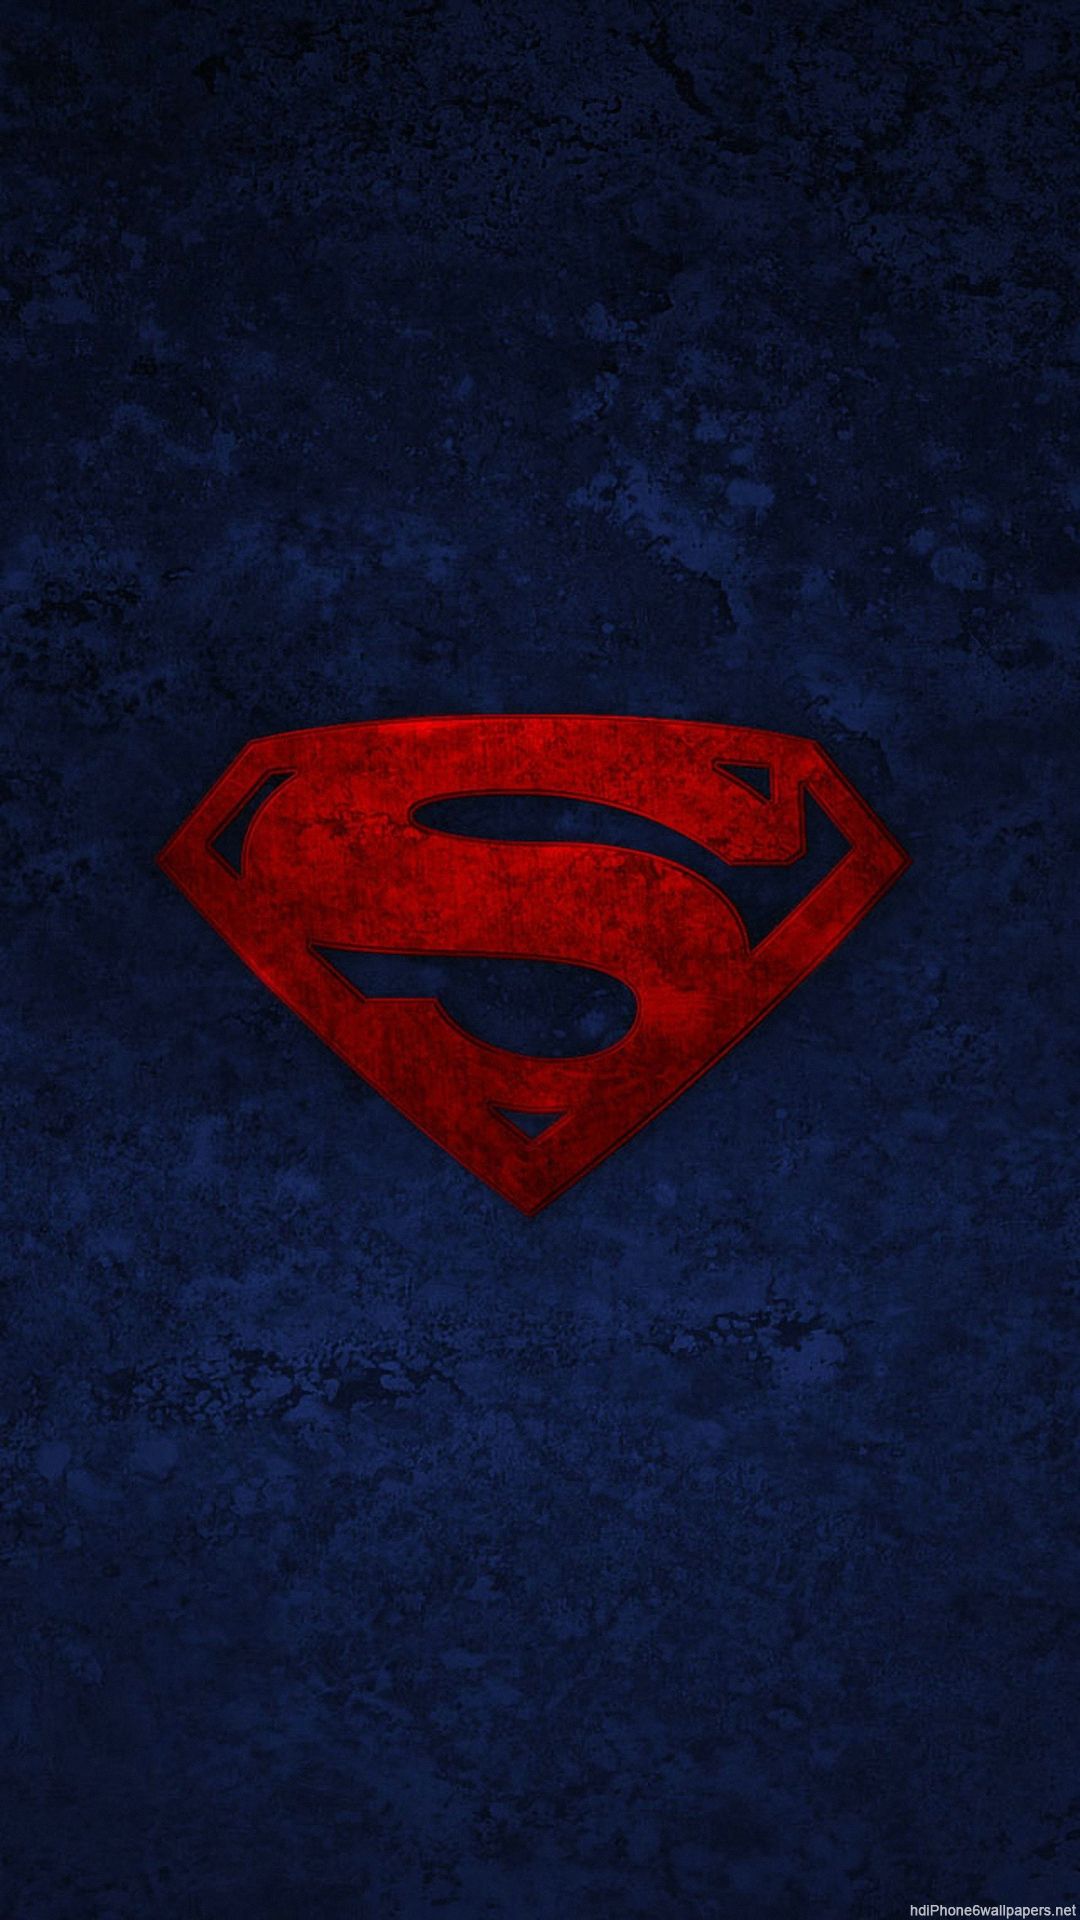 iphone 5s wallpaper hd,superman,red,superhero,fictional character,justice league